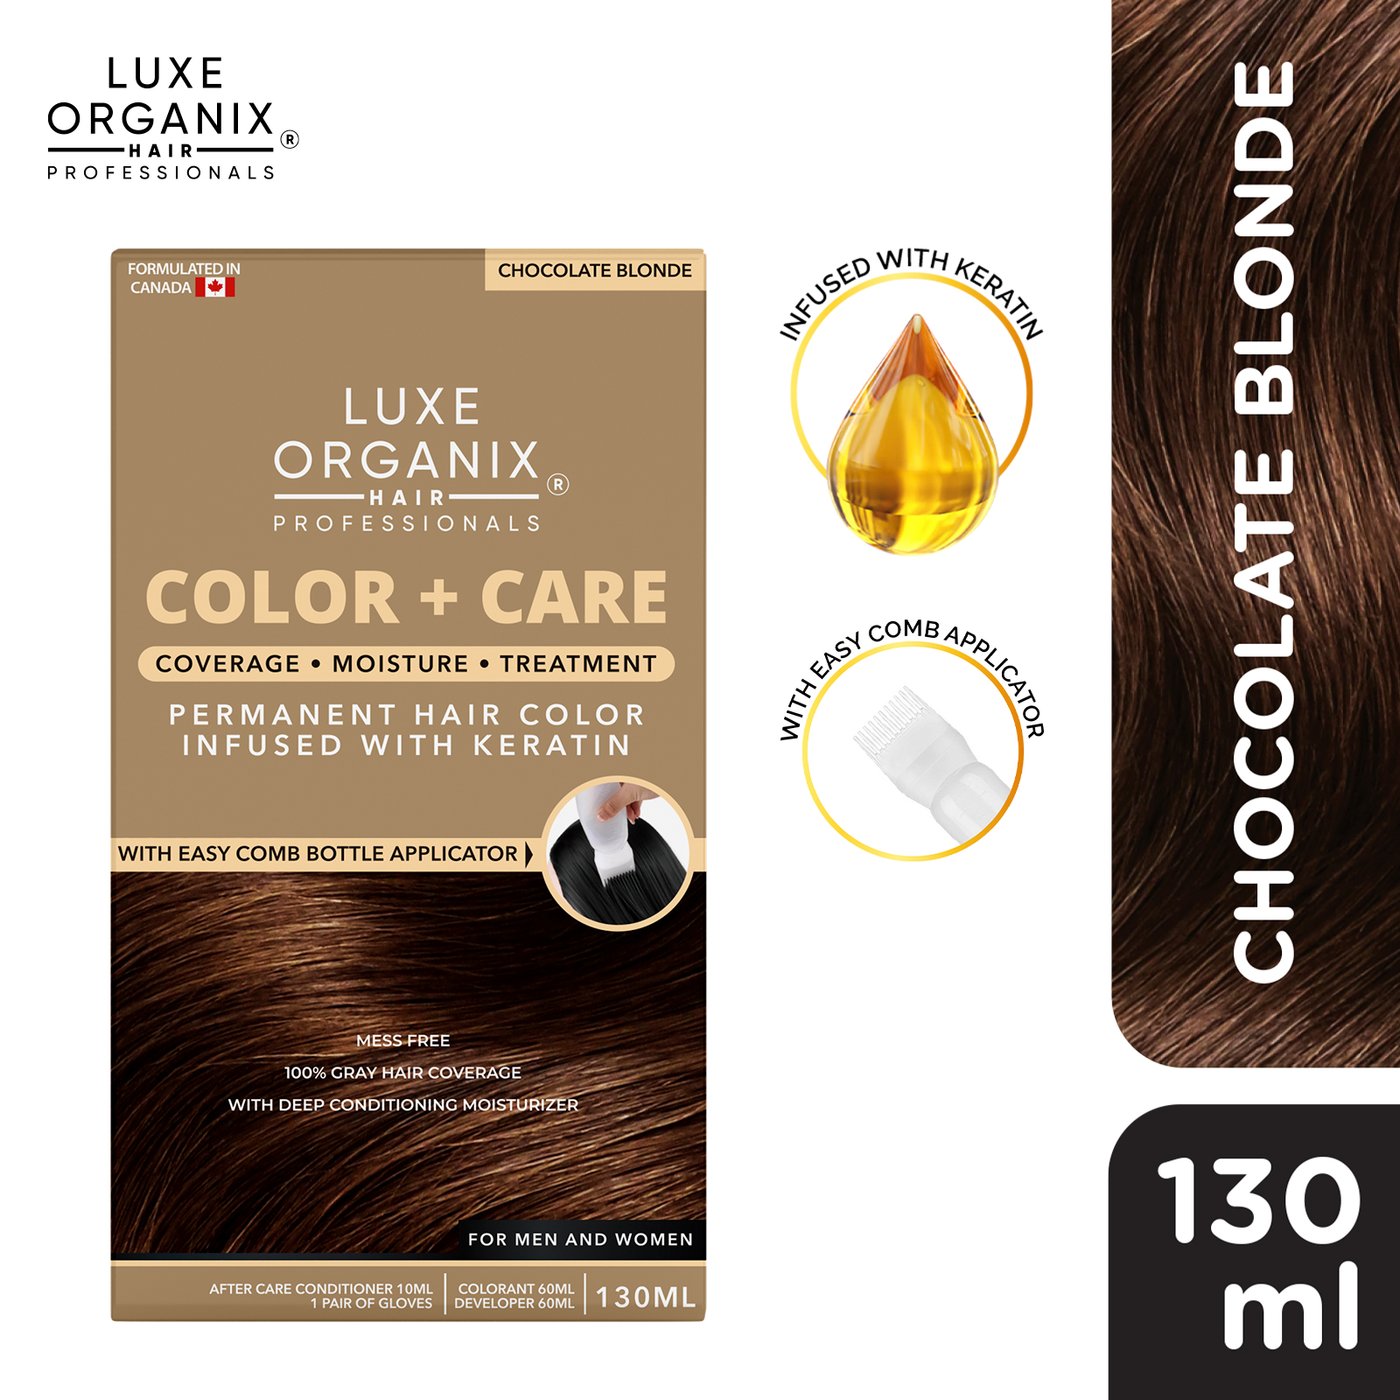 Luxe Organix Color + Care Permanent Hair Color 130ml (Chocolate Blonde)